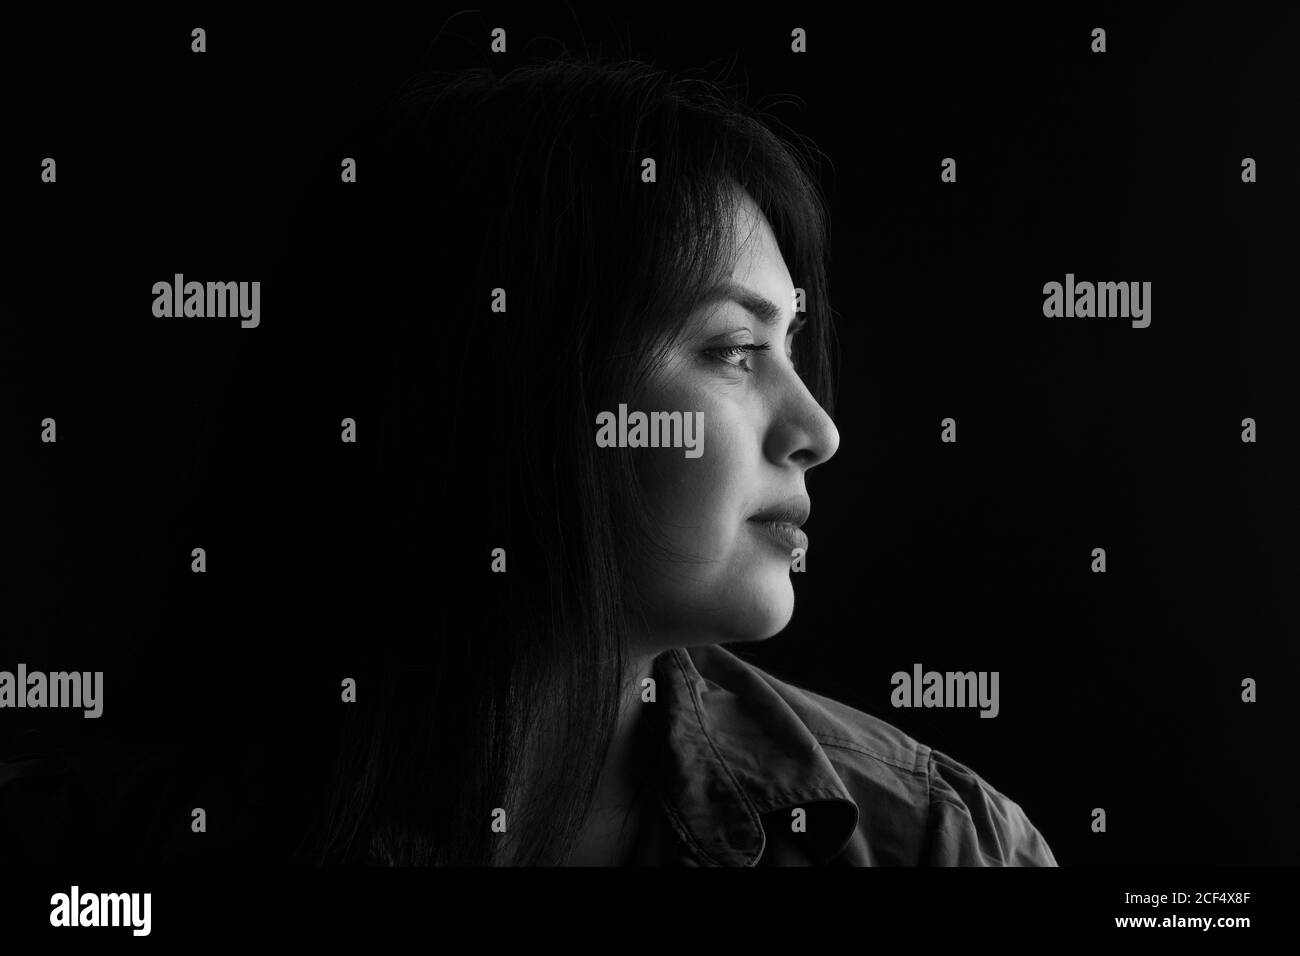 side view of dark portrait of a latin woman on black background, black and white Stock Photo